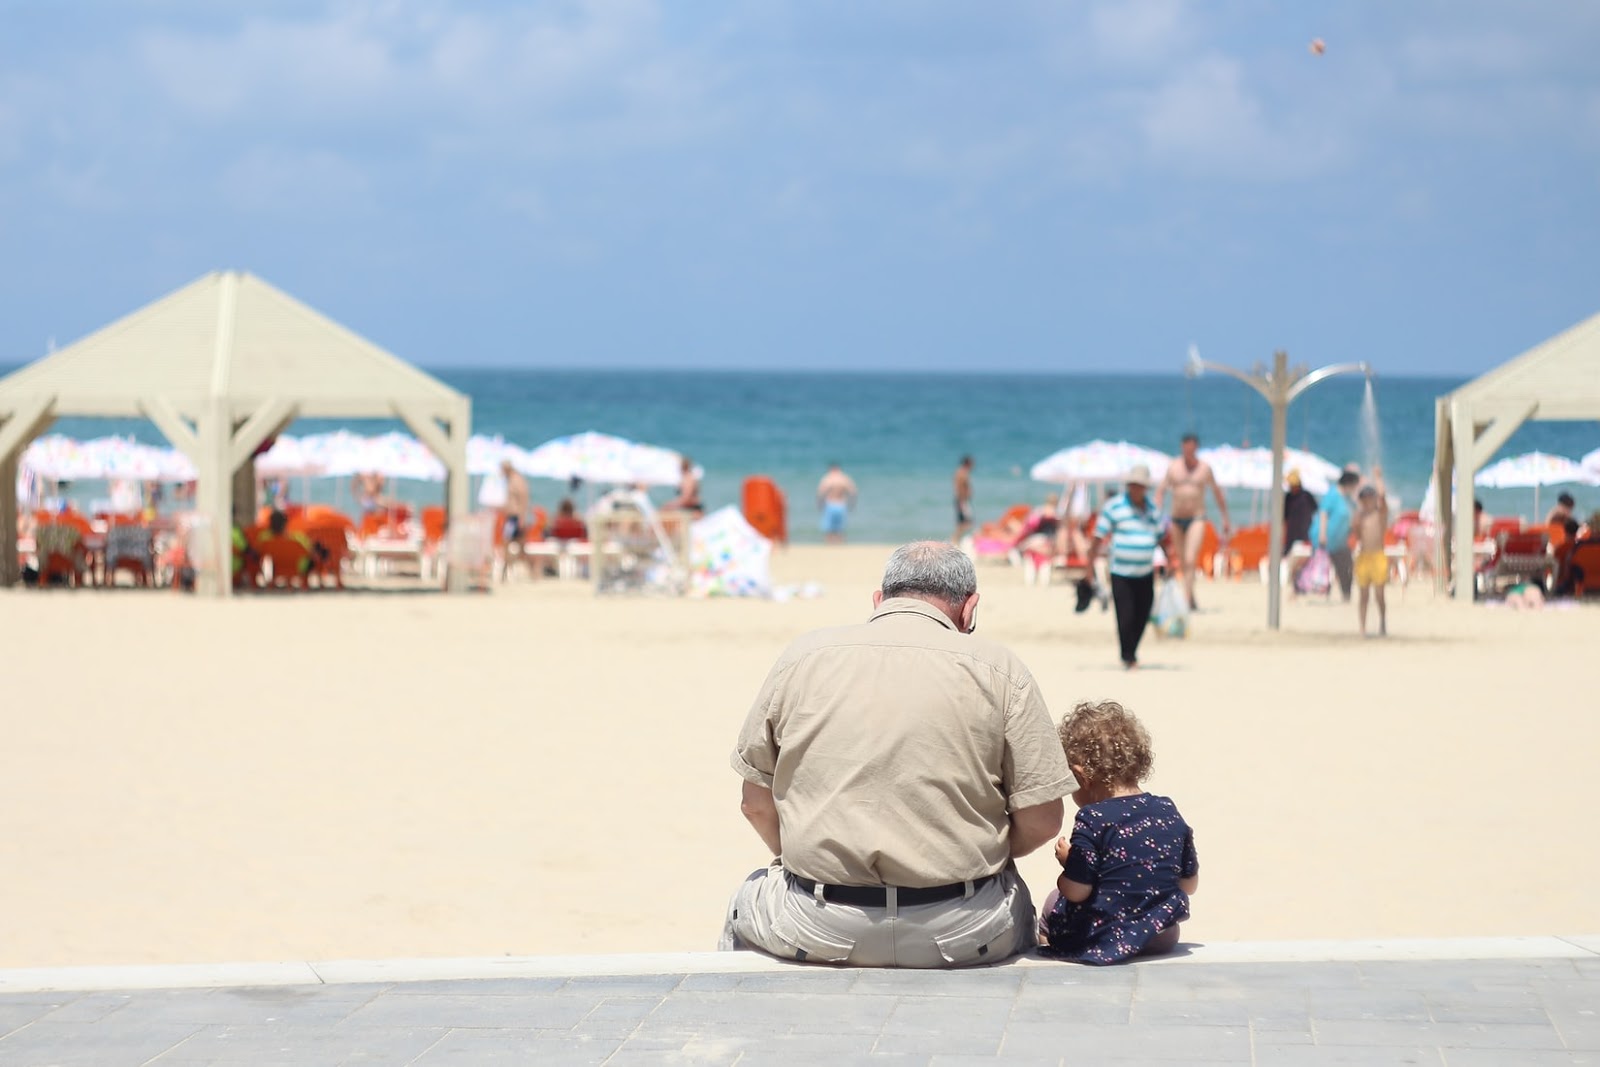 Grandparents Can Help Children Grow Up Happier According To Oxford University